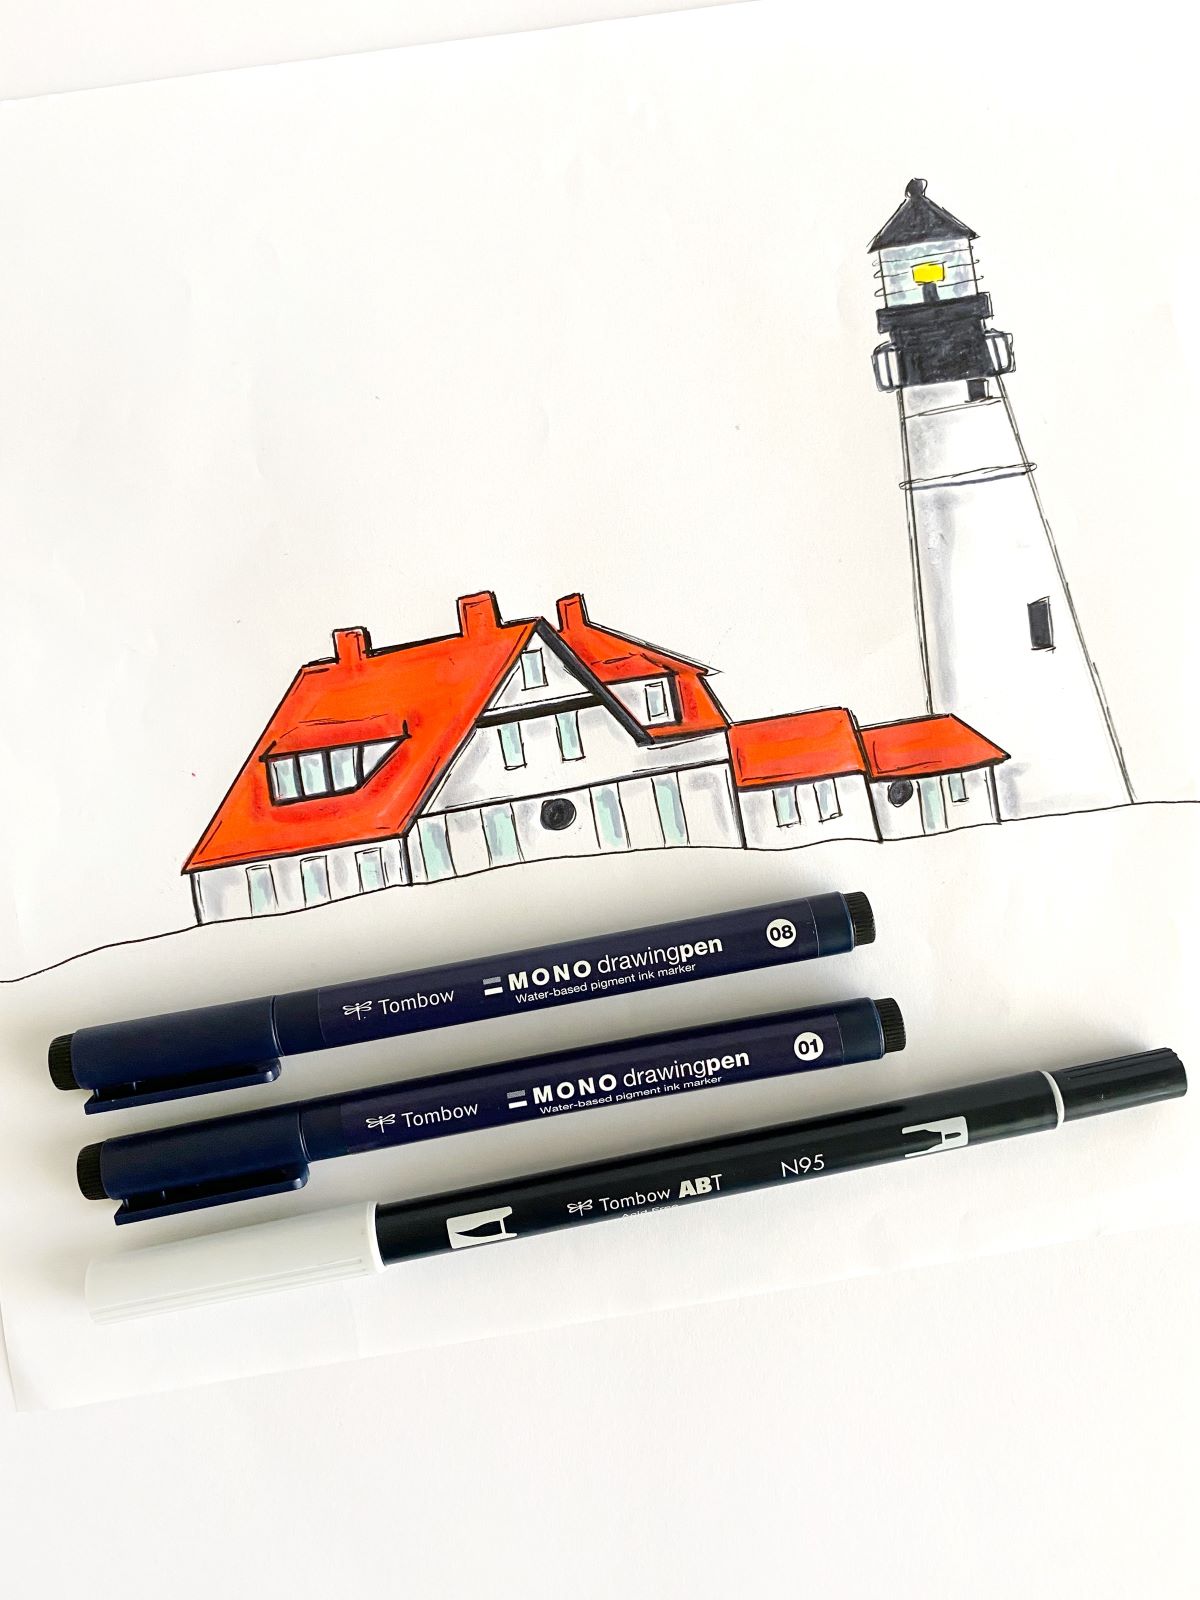 Create a Lighthouse in a Loosely Sketched Style - Mandy Faucher